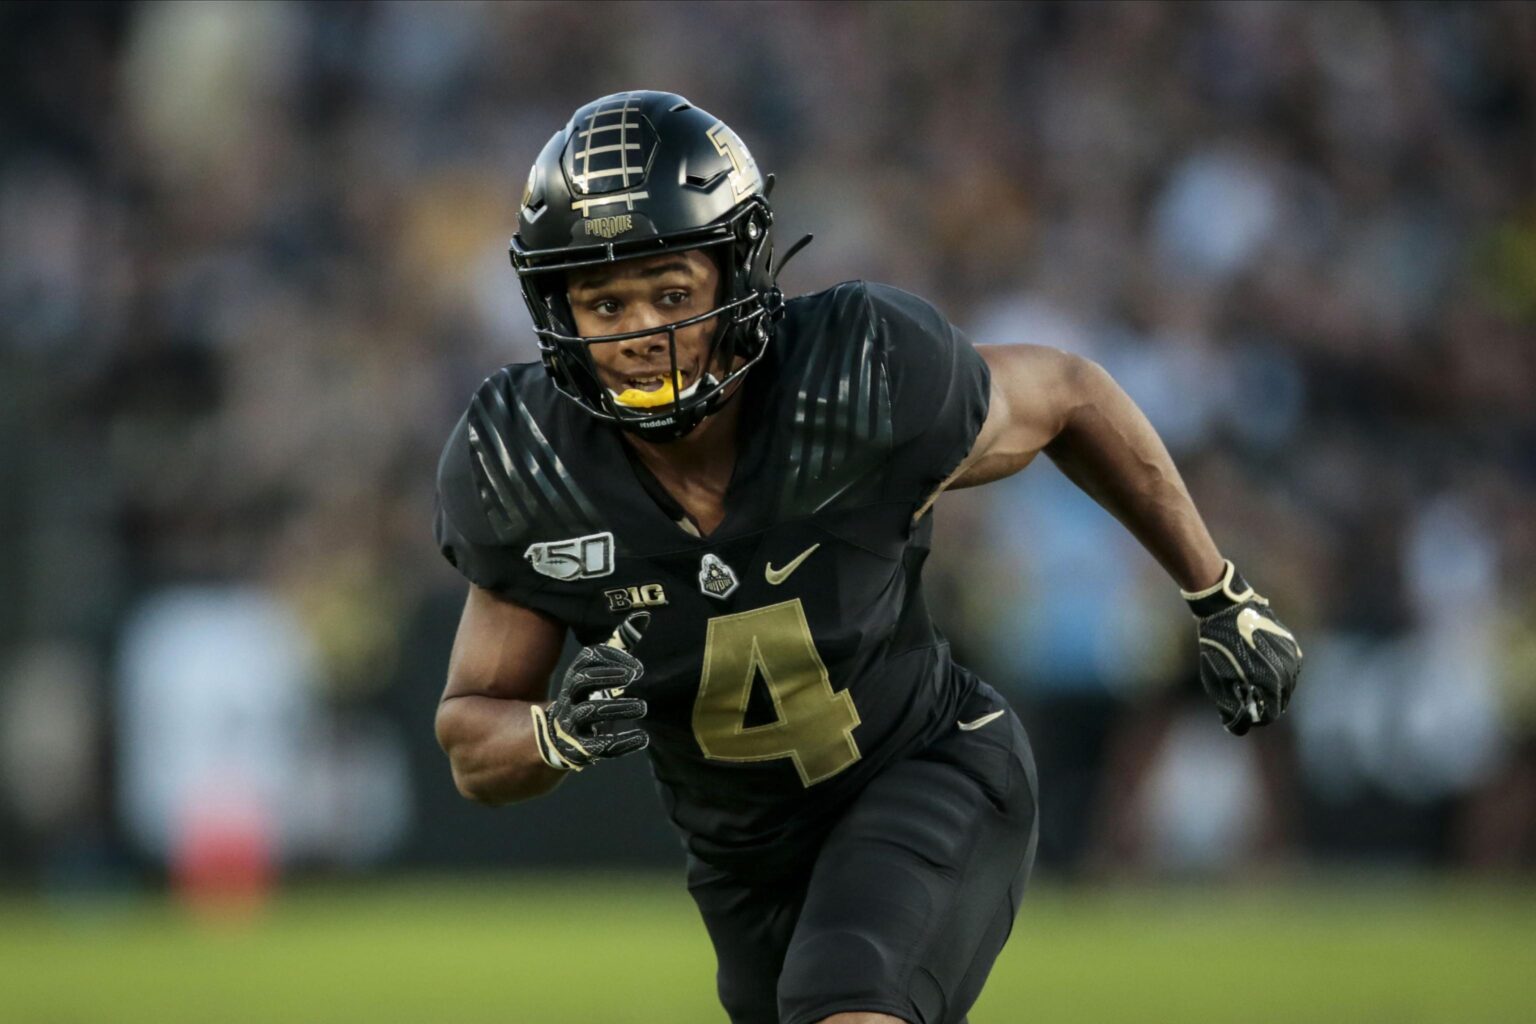 Purdue WR Rondale Moore is the best slot WR in the 2021 NFL Draft